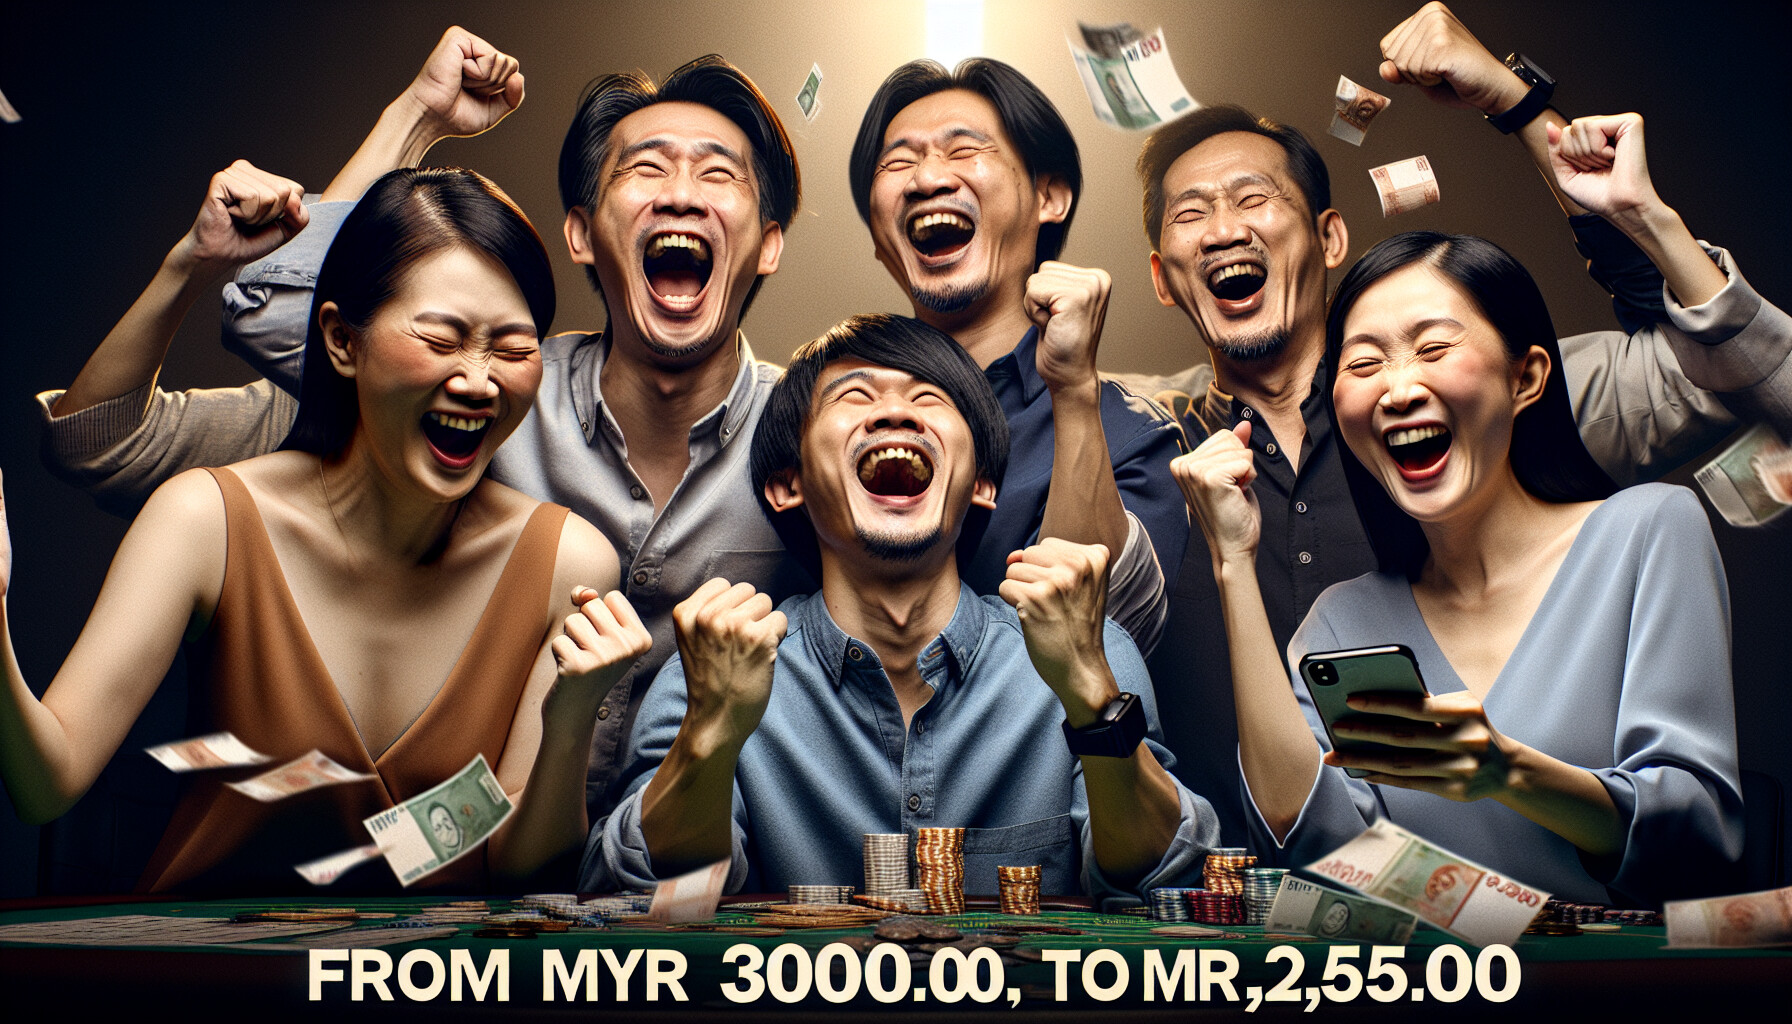  🚀 From RM300 to RM2,850: Join the Mind-Blowing Ride with Playtech! 💰 Discover the Astonishing Success Story! 